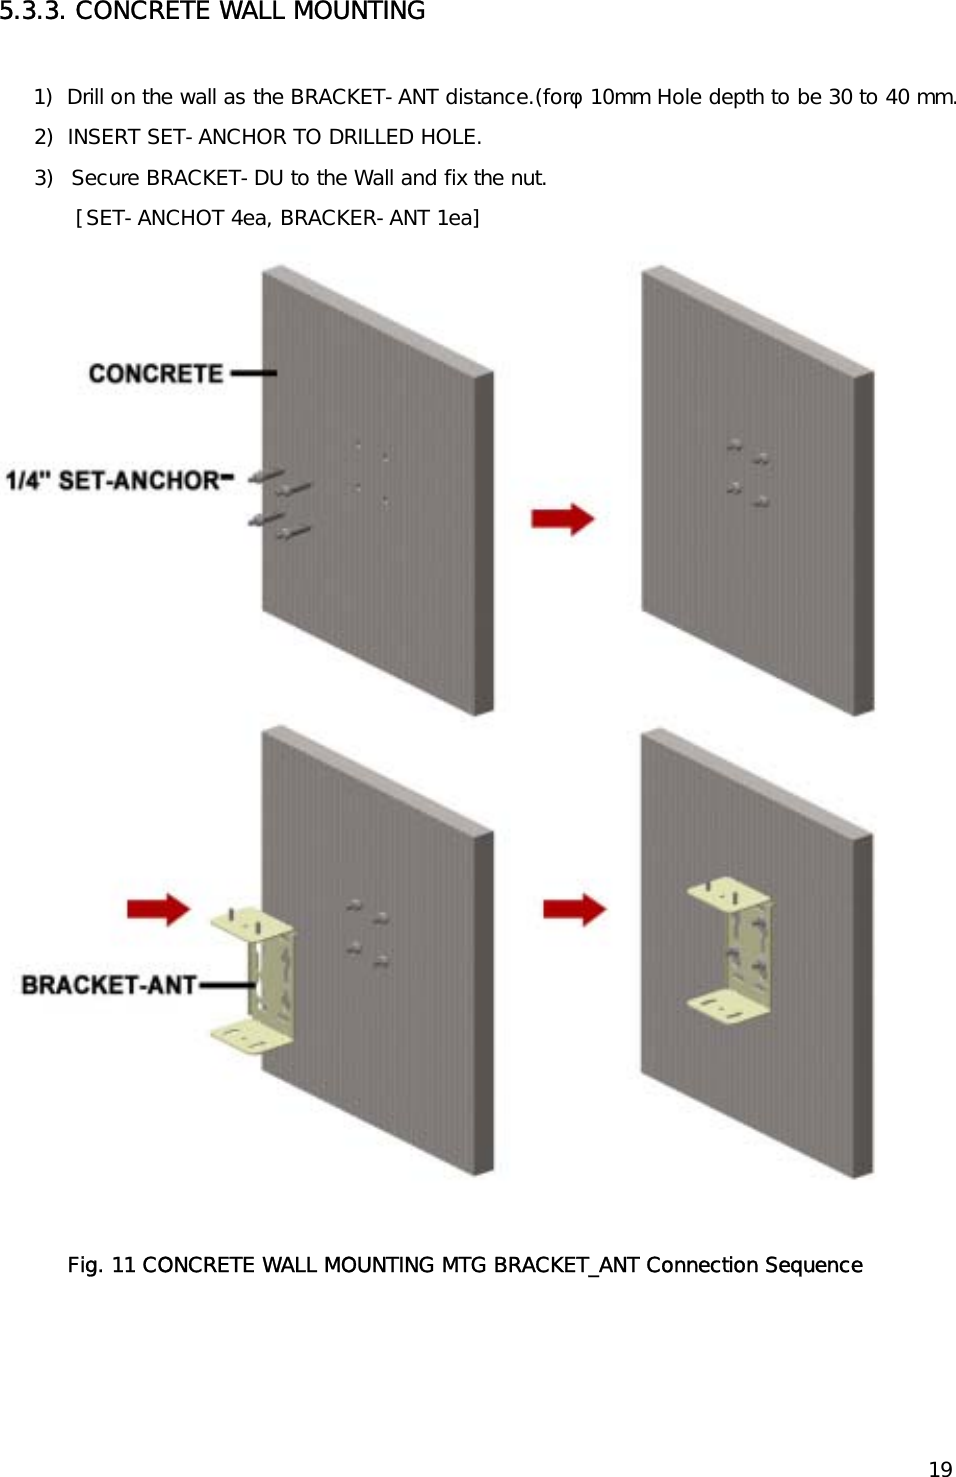   195.3.3. CONCRETE WALL MOUNTING          1)  Drill on the wall as the BRACKET-ANT distance.(forφ 10mm Hole depth to be 30 to 40 mm. 2)  INSERT SET-ANCHOR TO DRILLED HOLE. 3)  Secure BRACKET-DU to the Wall and fix the nut. [SET-ANCHOT 4ea, BRACKER-ANT 1ea]  Fig. 11 CONCRETE WALL MOUNTING MTG BRACKET_ANT Connection Sequence  